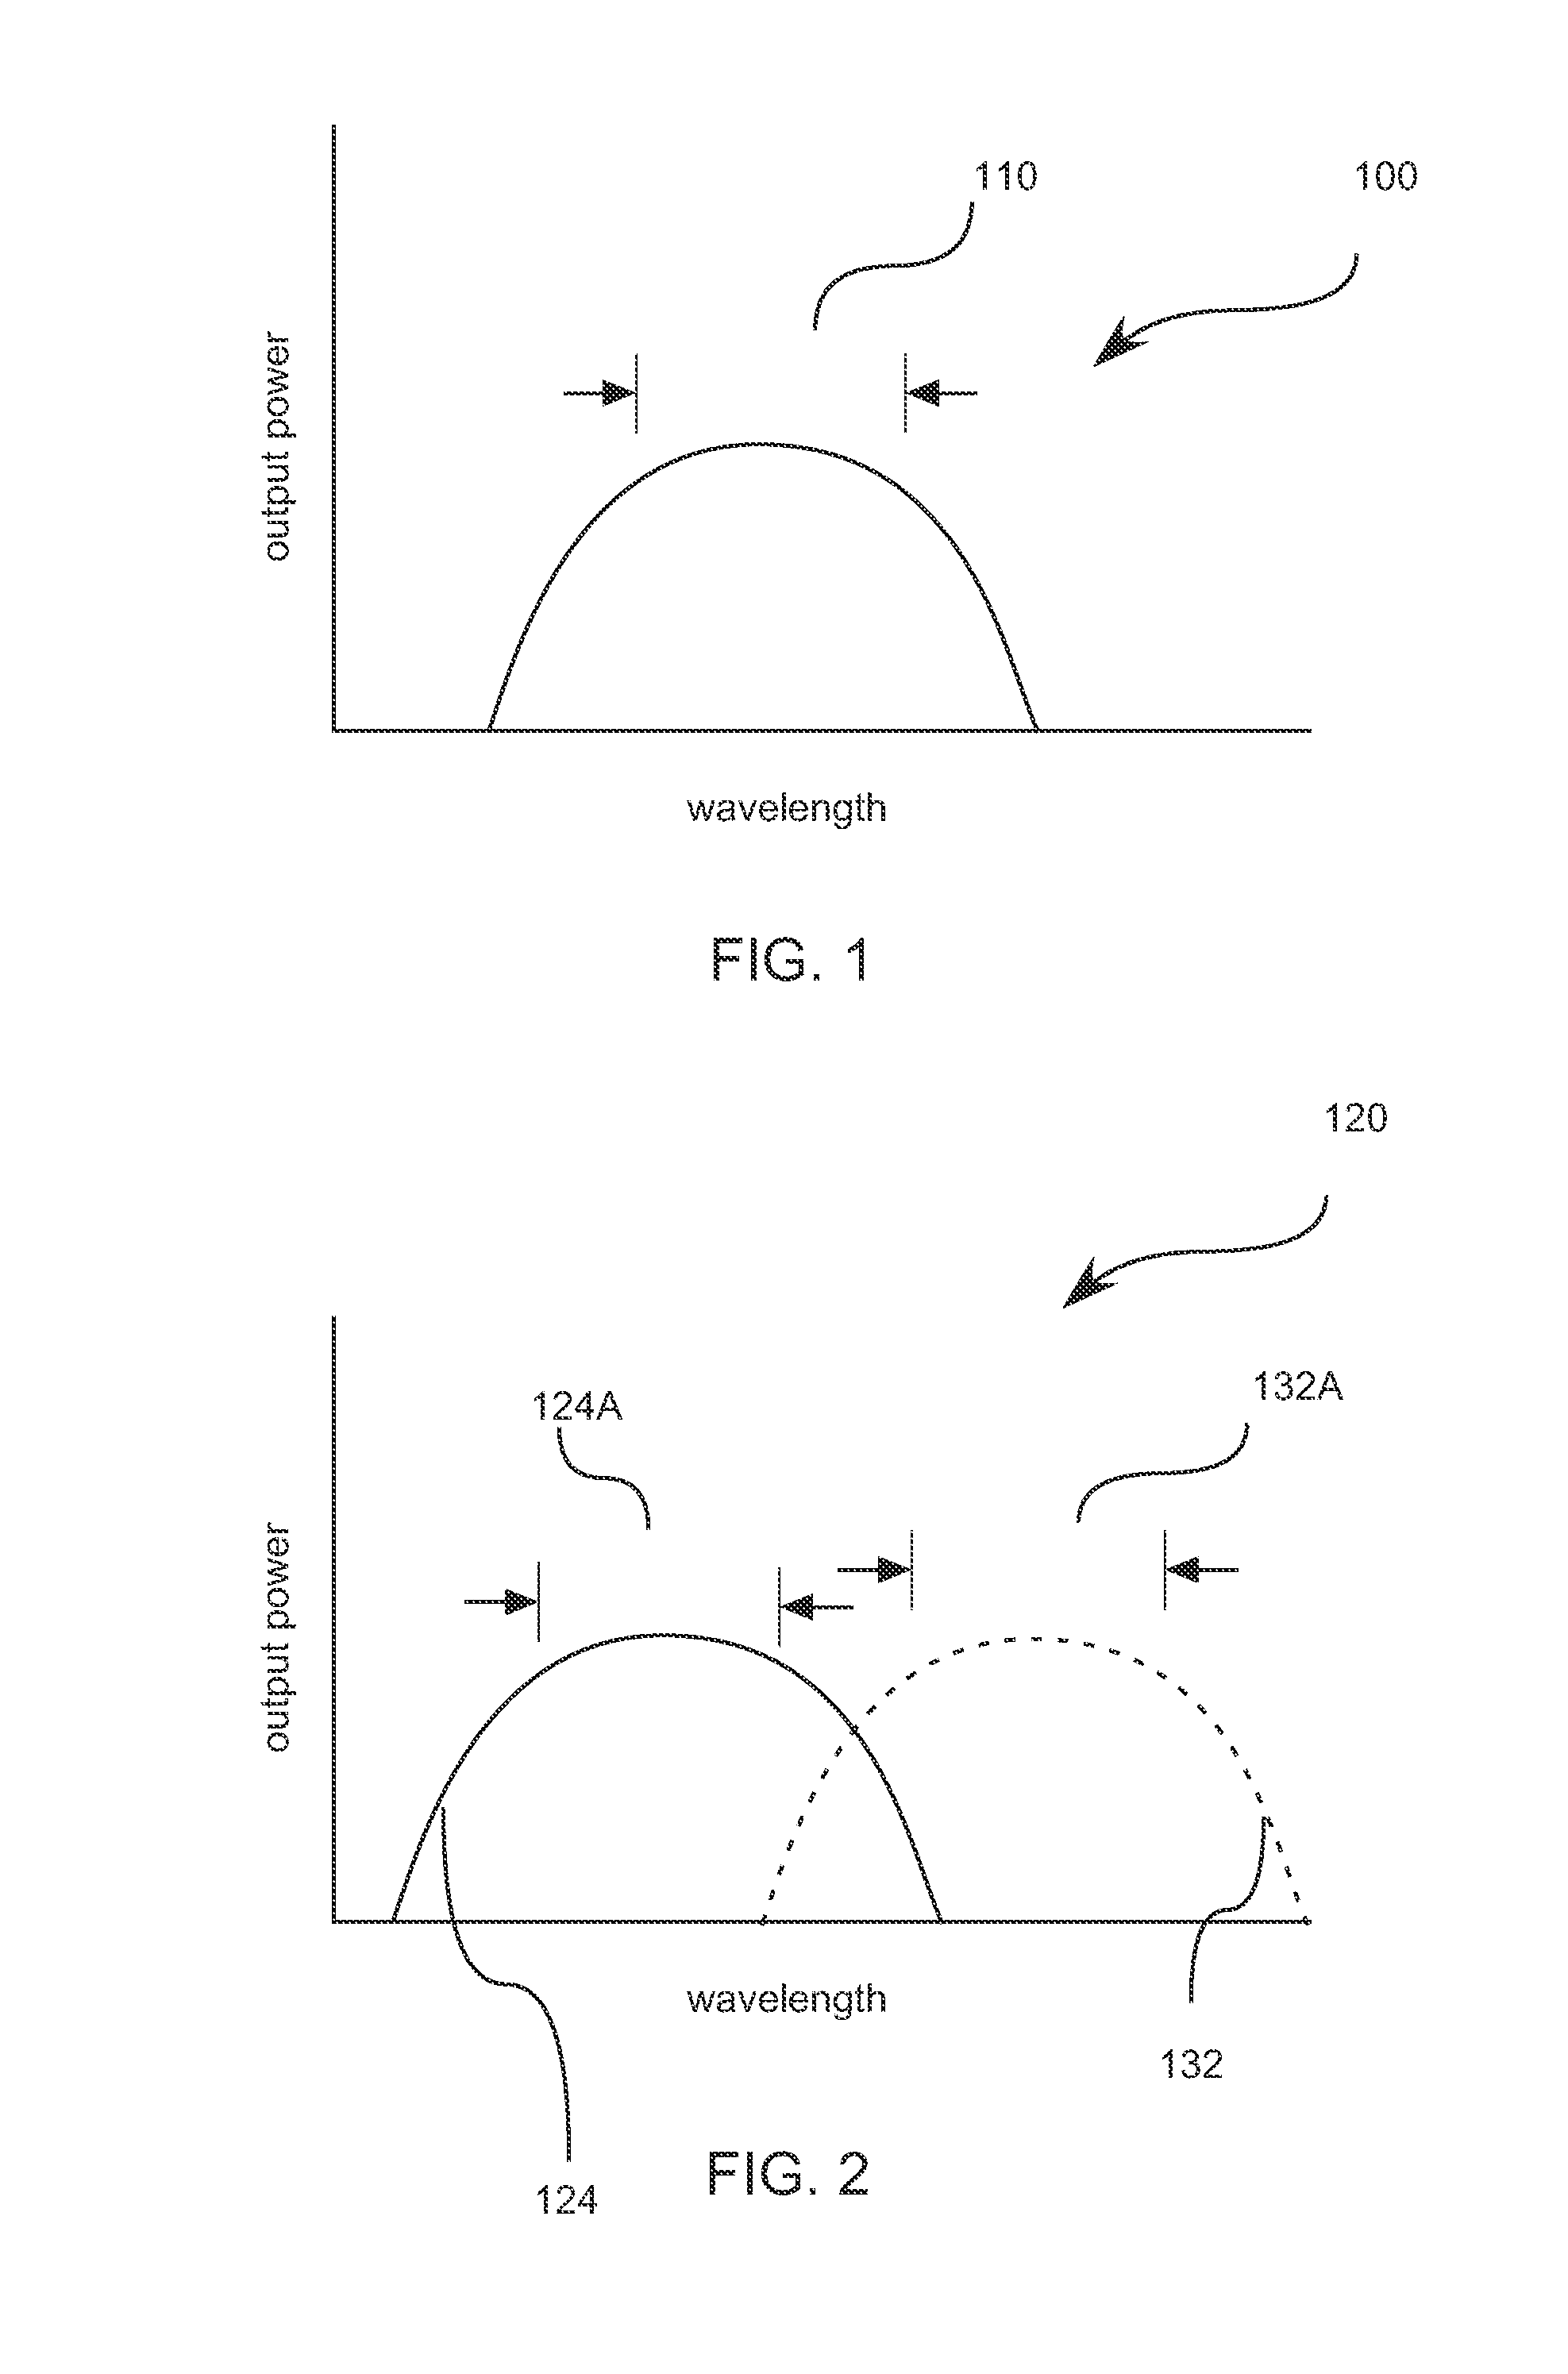 Method for Improving Performance of Wavelength Beam Combining Diode Laser Systems